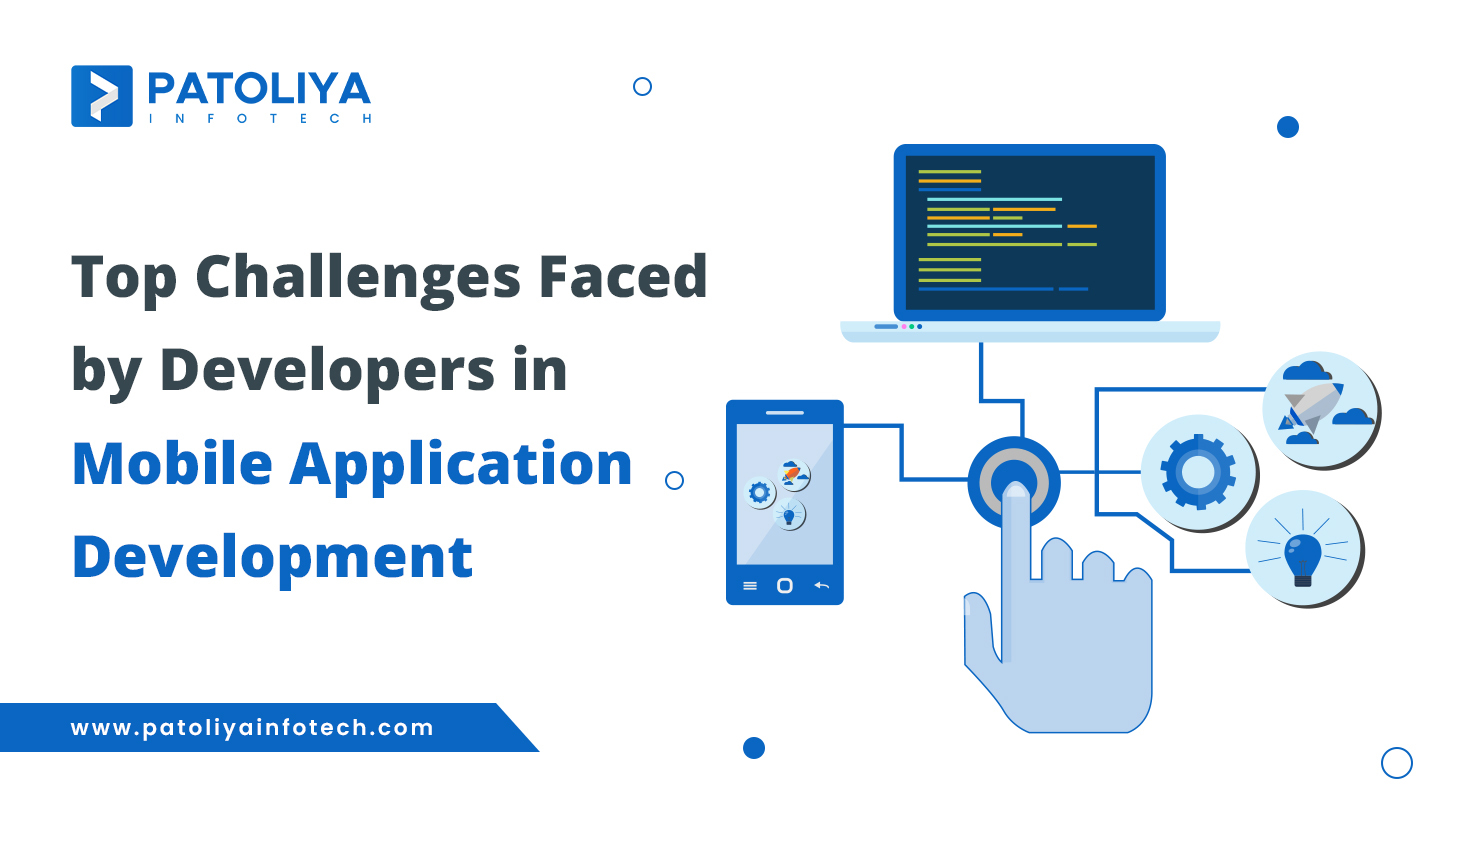 Top Challenges Faced by Developers in Mobile Application Development